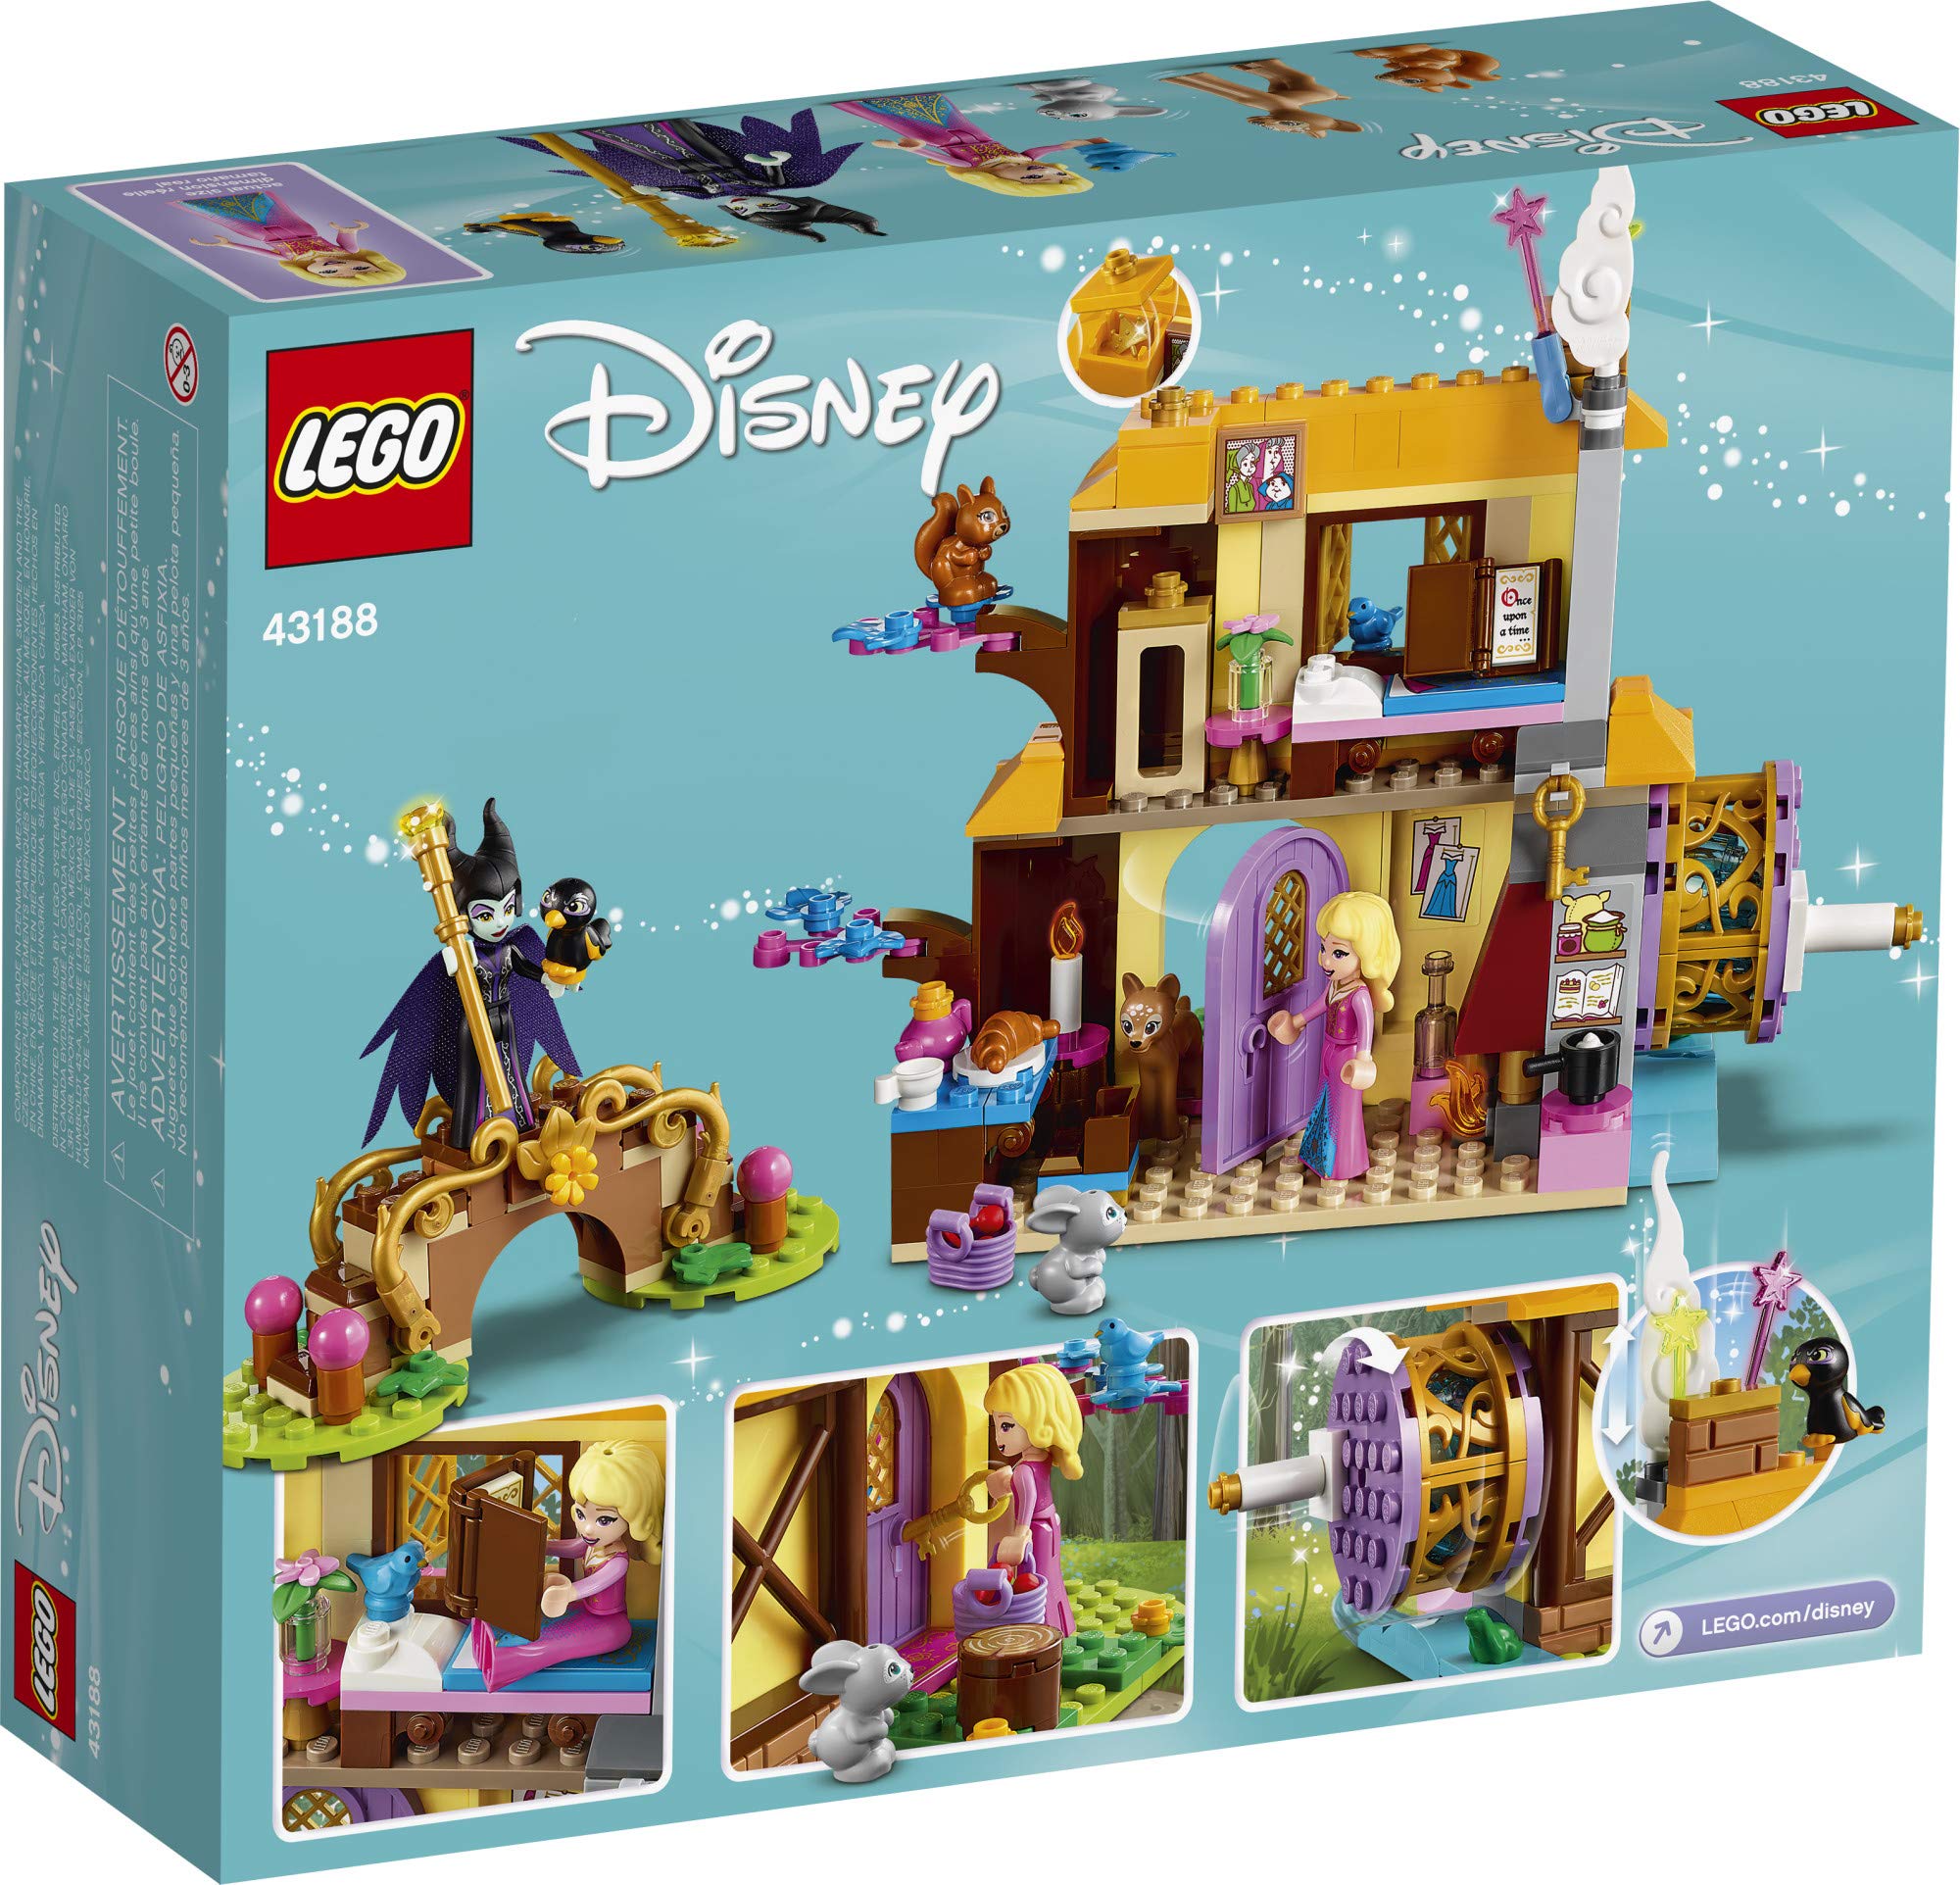 LEGO Disney Aurora’s Forest Cottage 43188, Sleeping Beauty Building Kit for Kids; A Fun Holiday Present or Birthday Gift for Disney Princess Fans (300 Pieces)